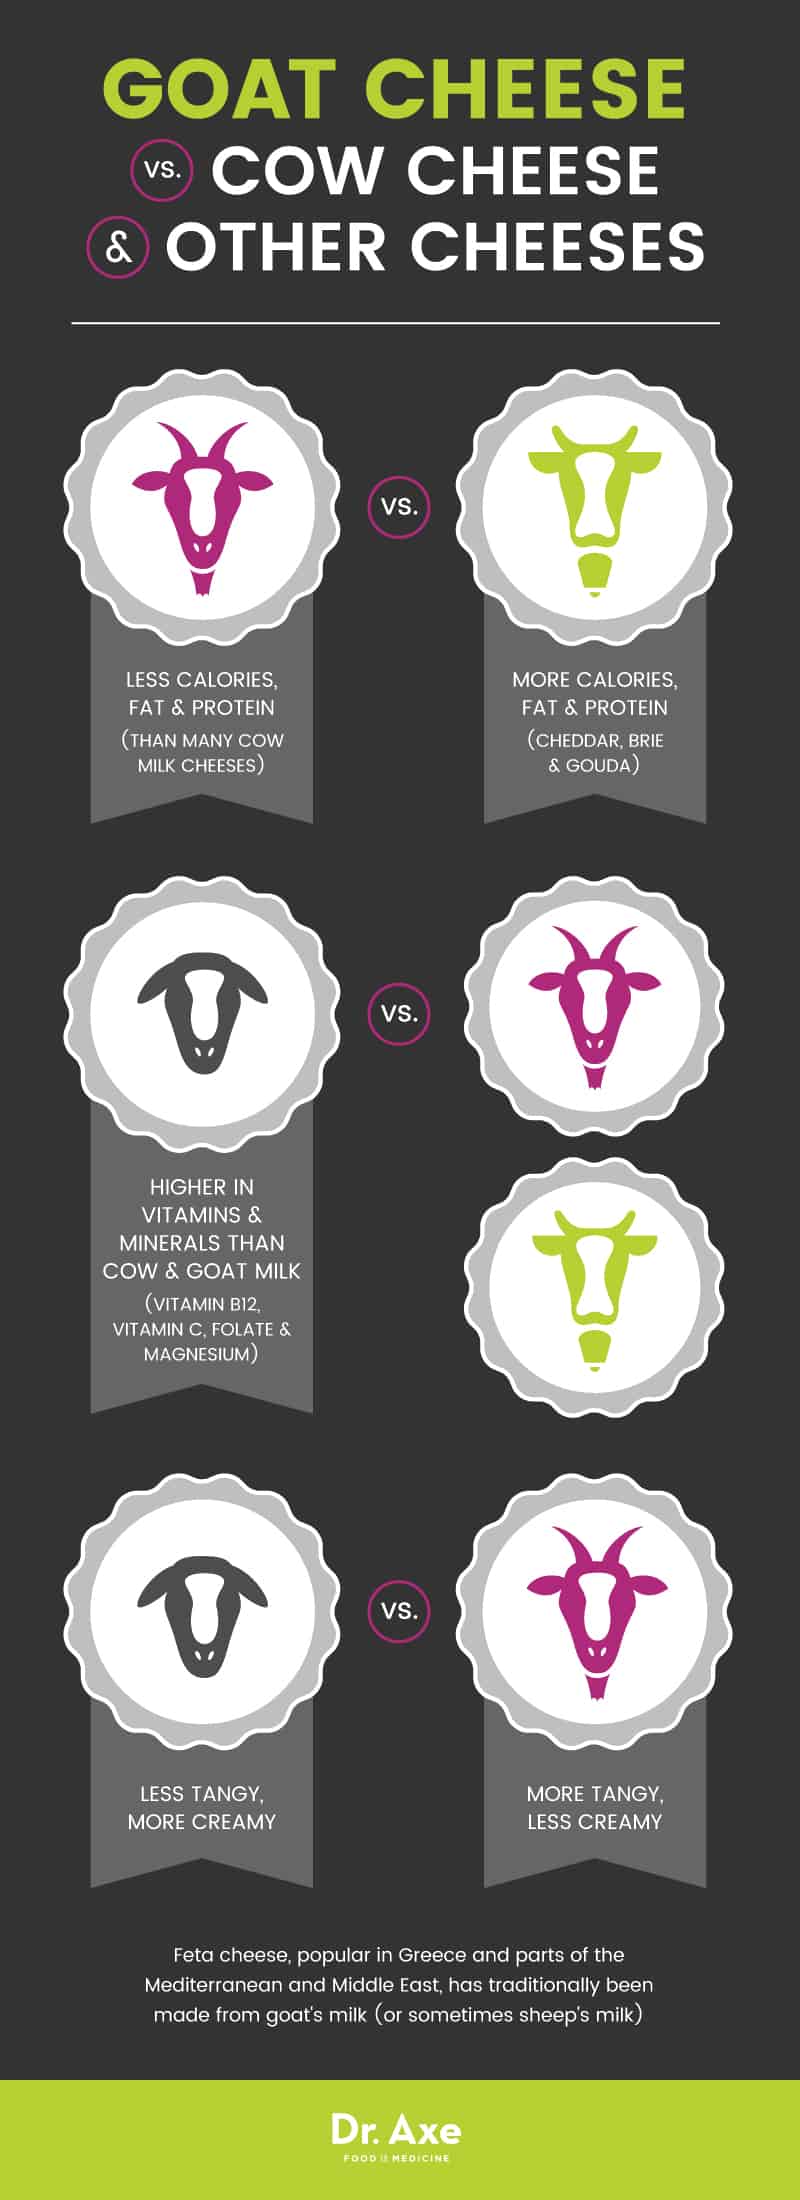 Goat cheese vs. other cheese - Dr. Axe